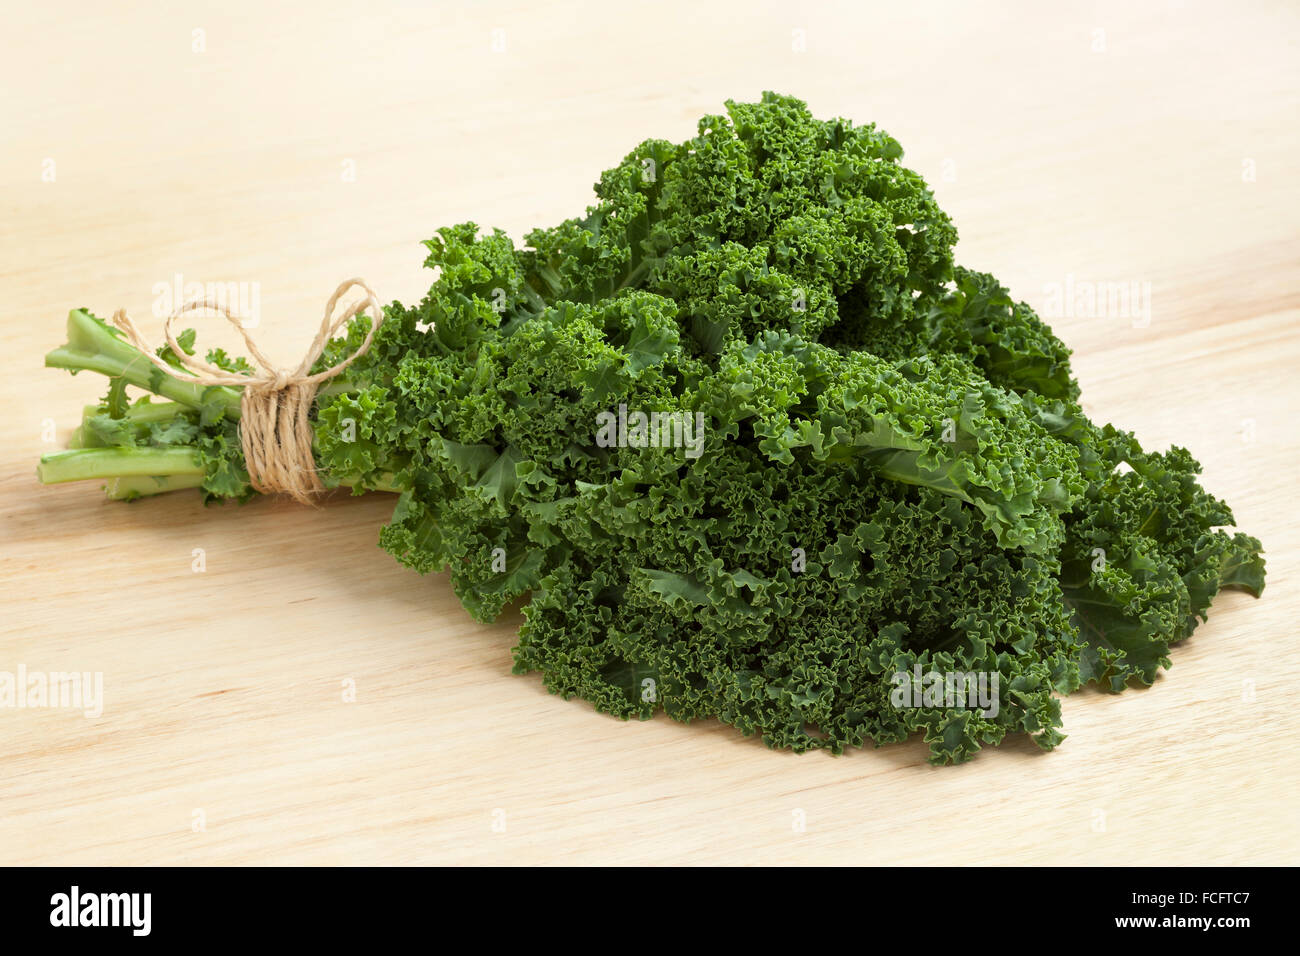 Bouquet of fresh picked organic curly kale Stock Photo